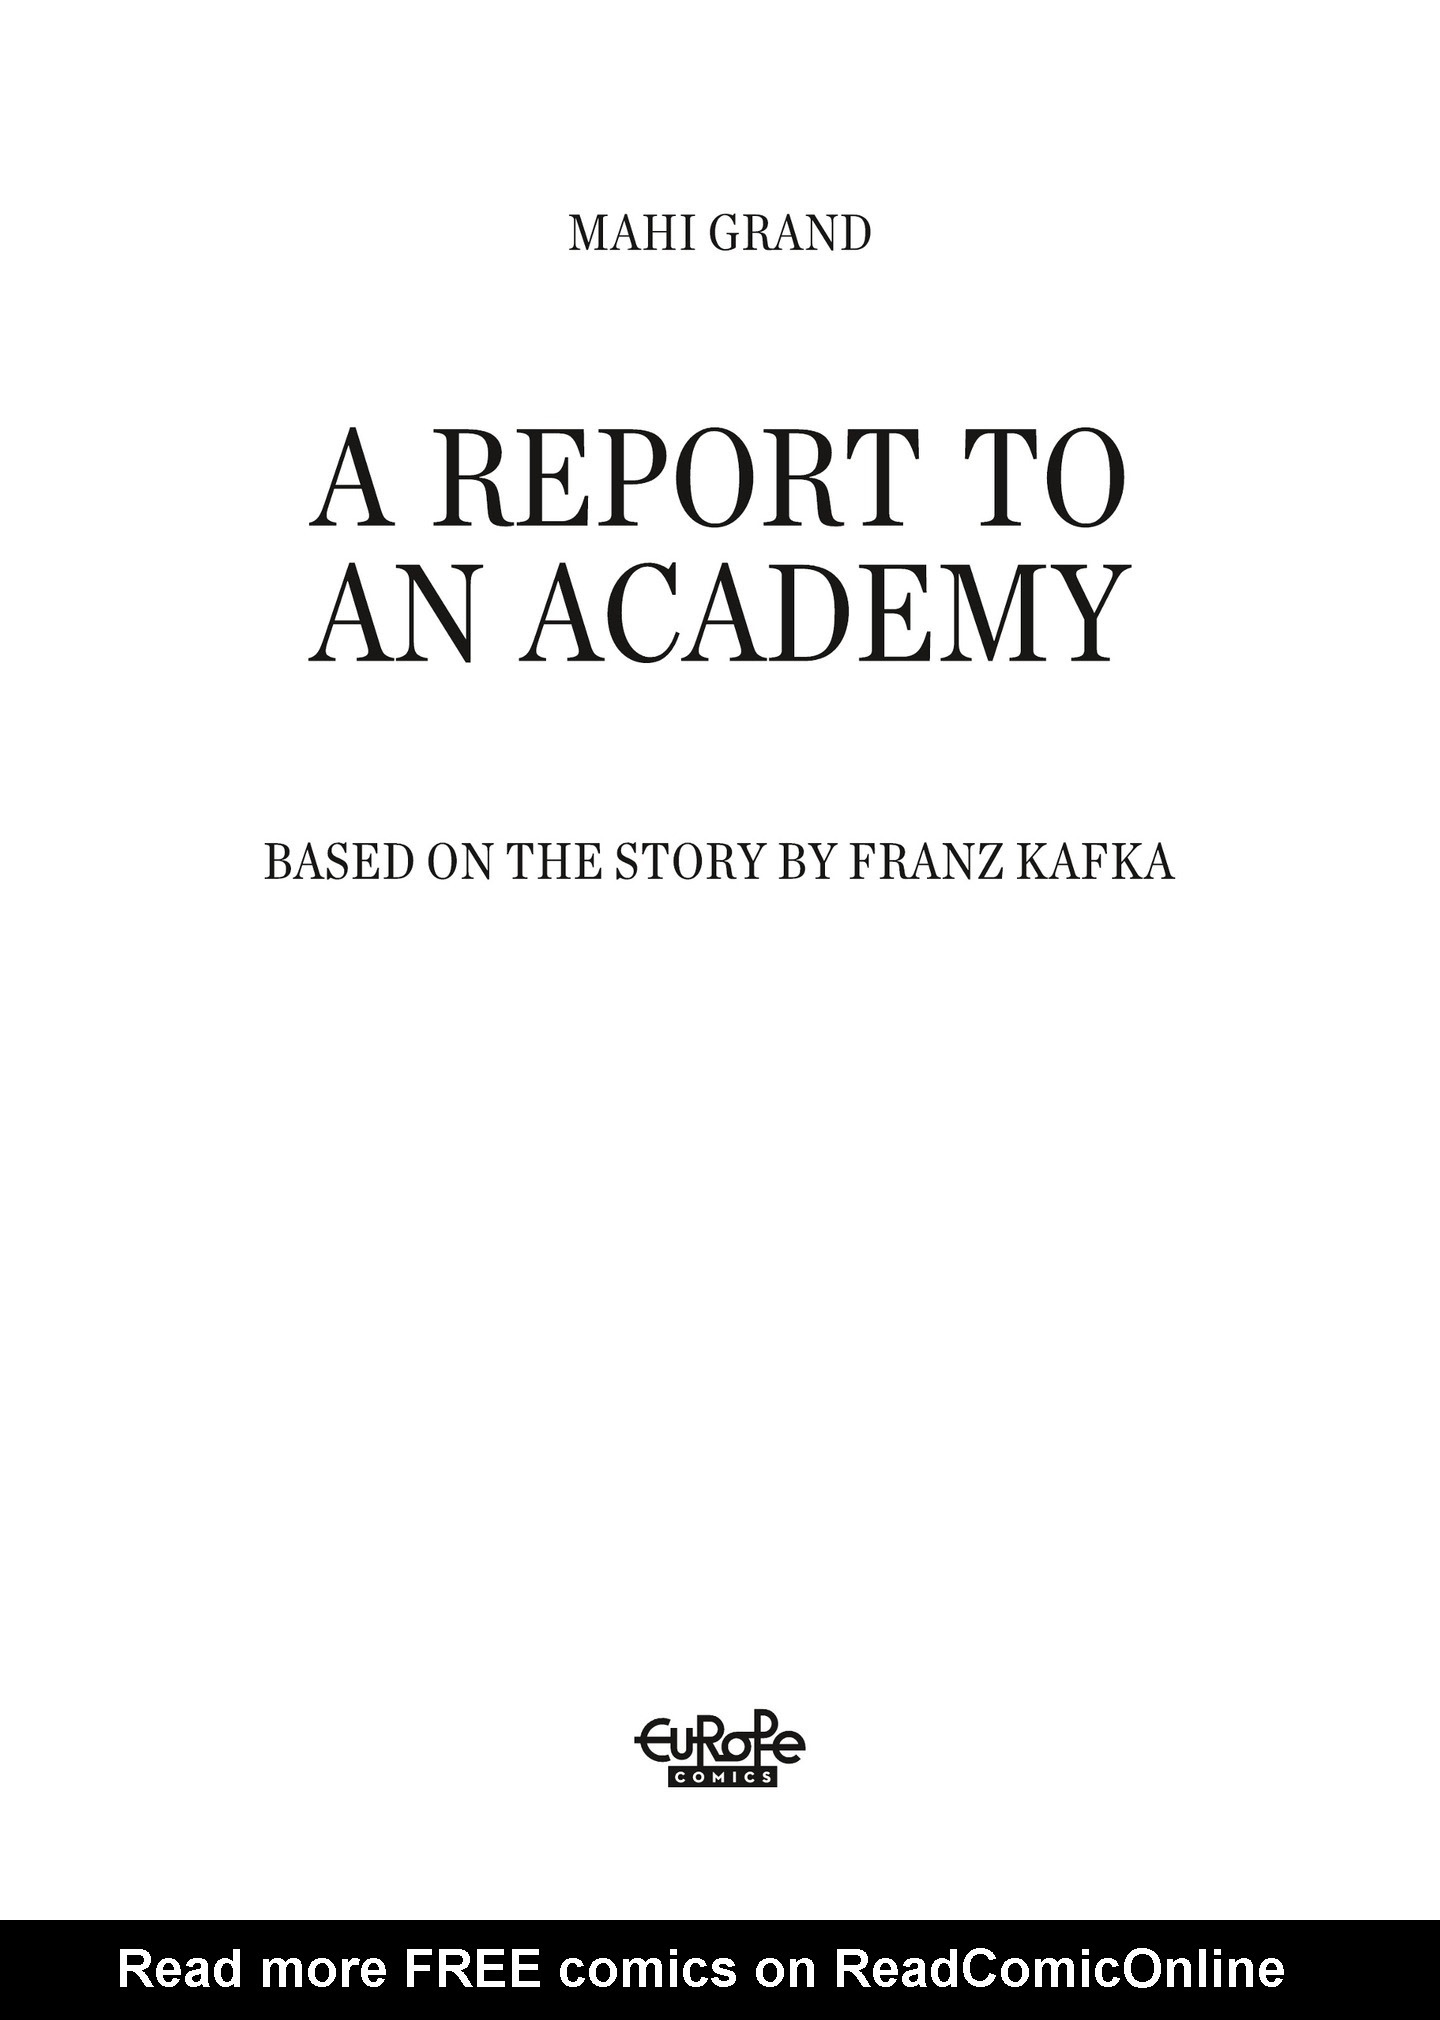 Read online A Report to an Academy comic -  Issue # TPB - 2